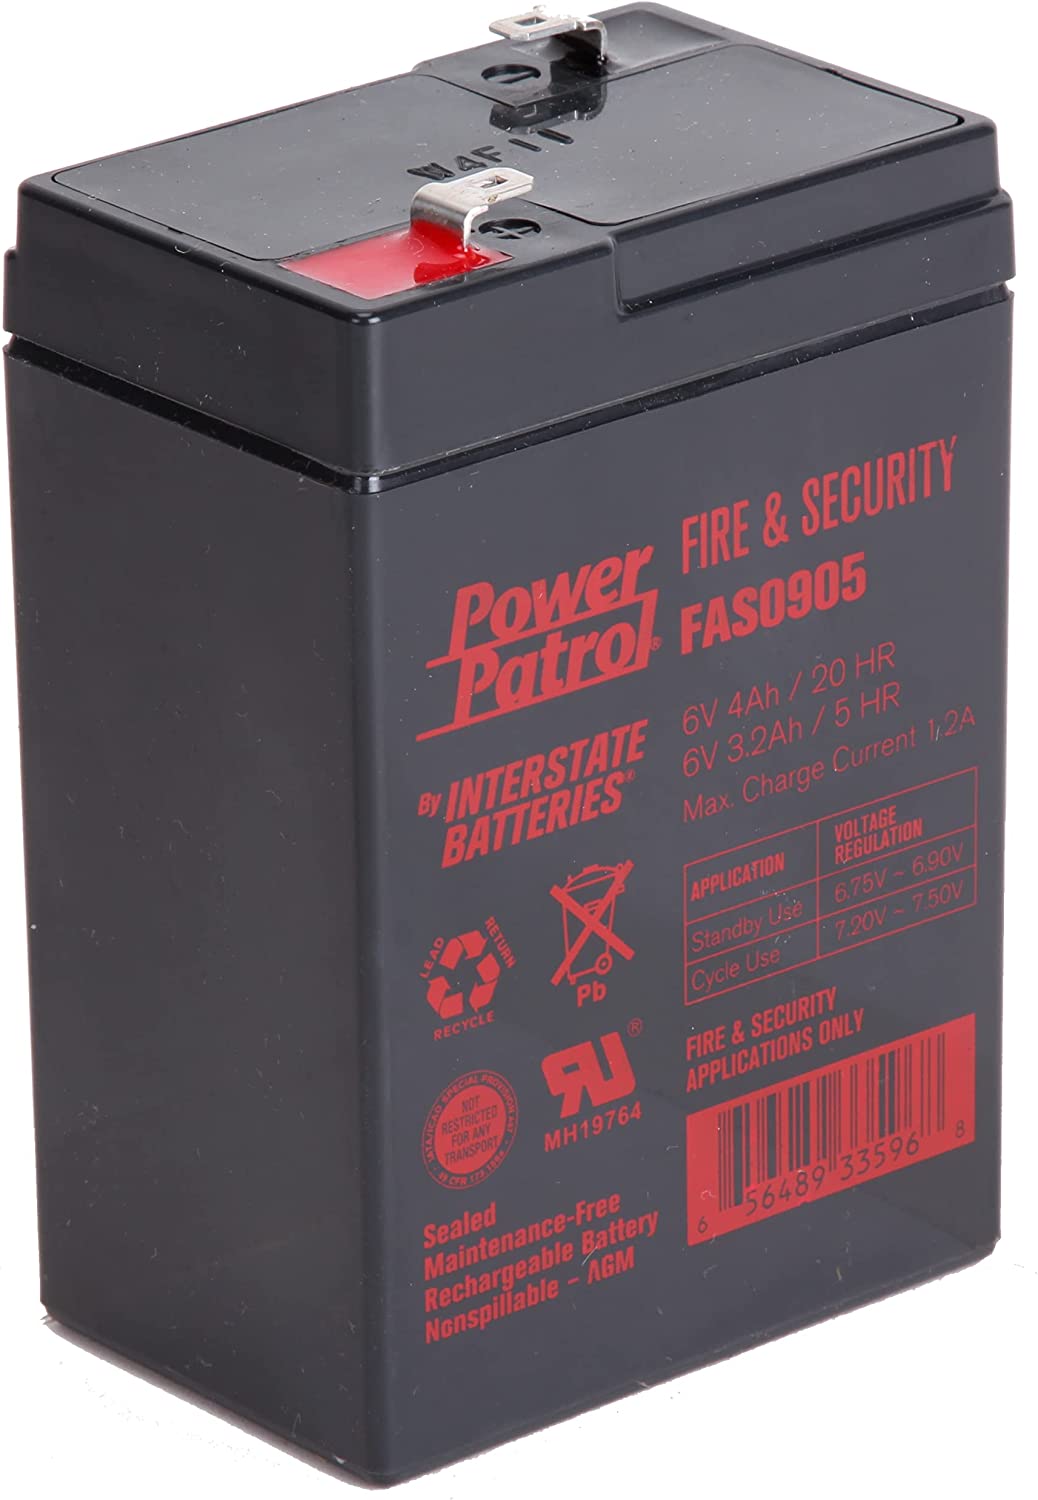 Interstate Batteries FAS0905, Power Patrol, 6V 4Ah Fire & Security Battery with Sealed Lead Acid Rechargeable SLA AGM (F1 Terminal) for Fire Alarms, Security Systems